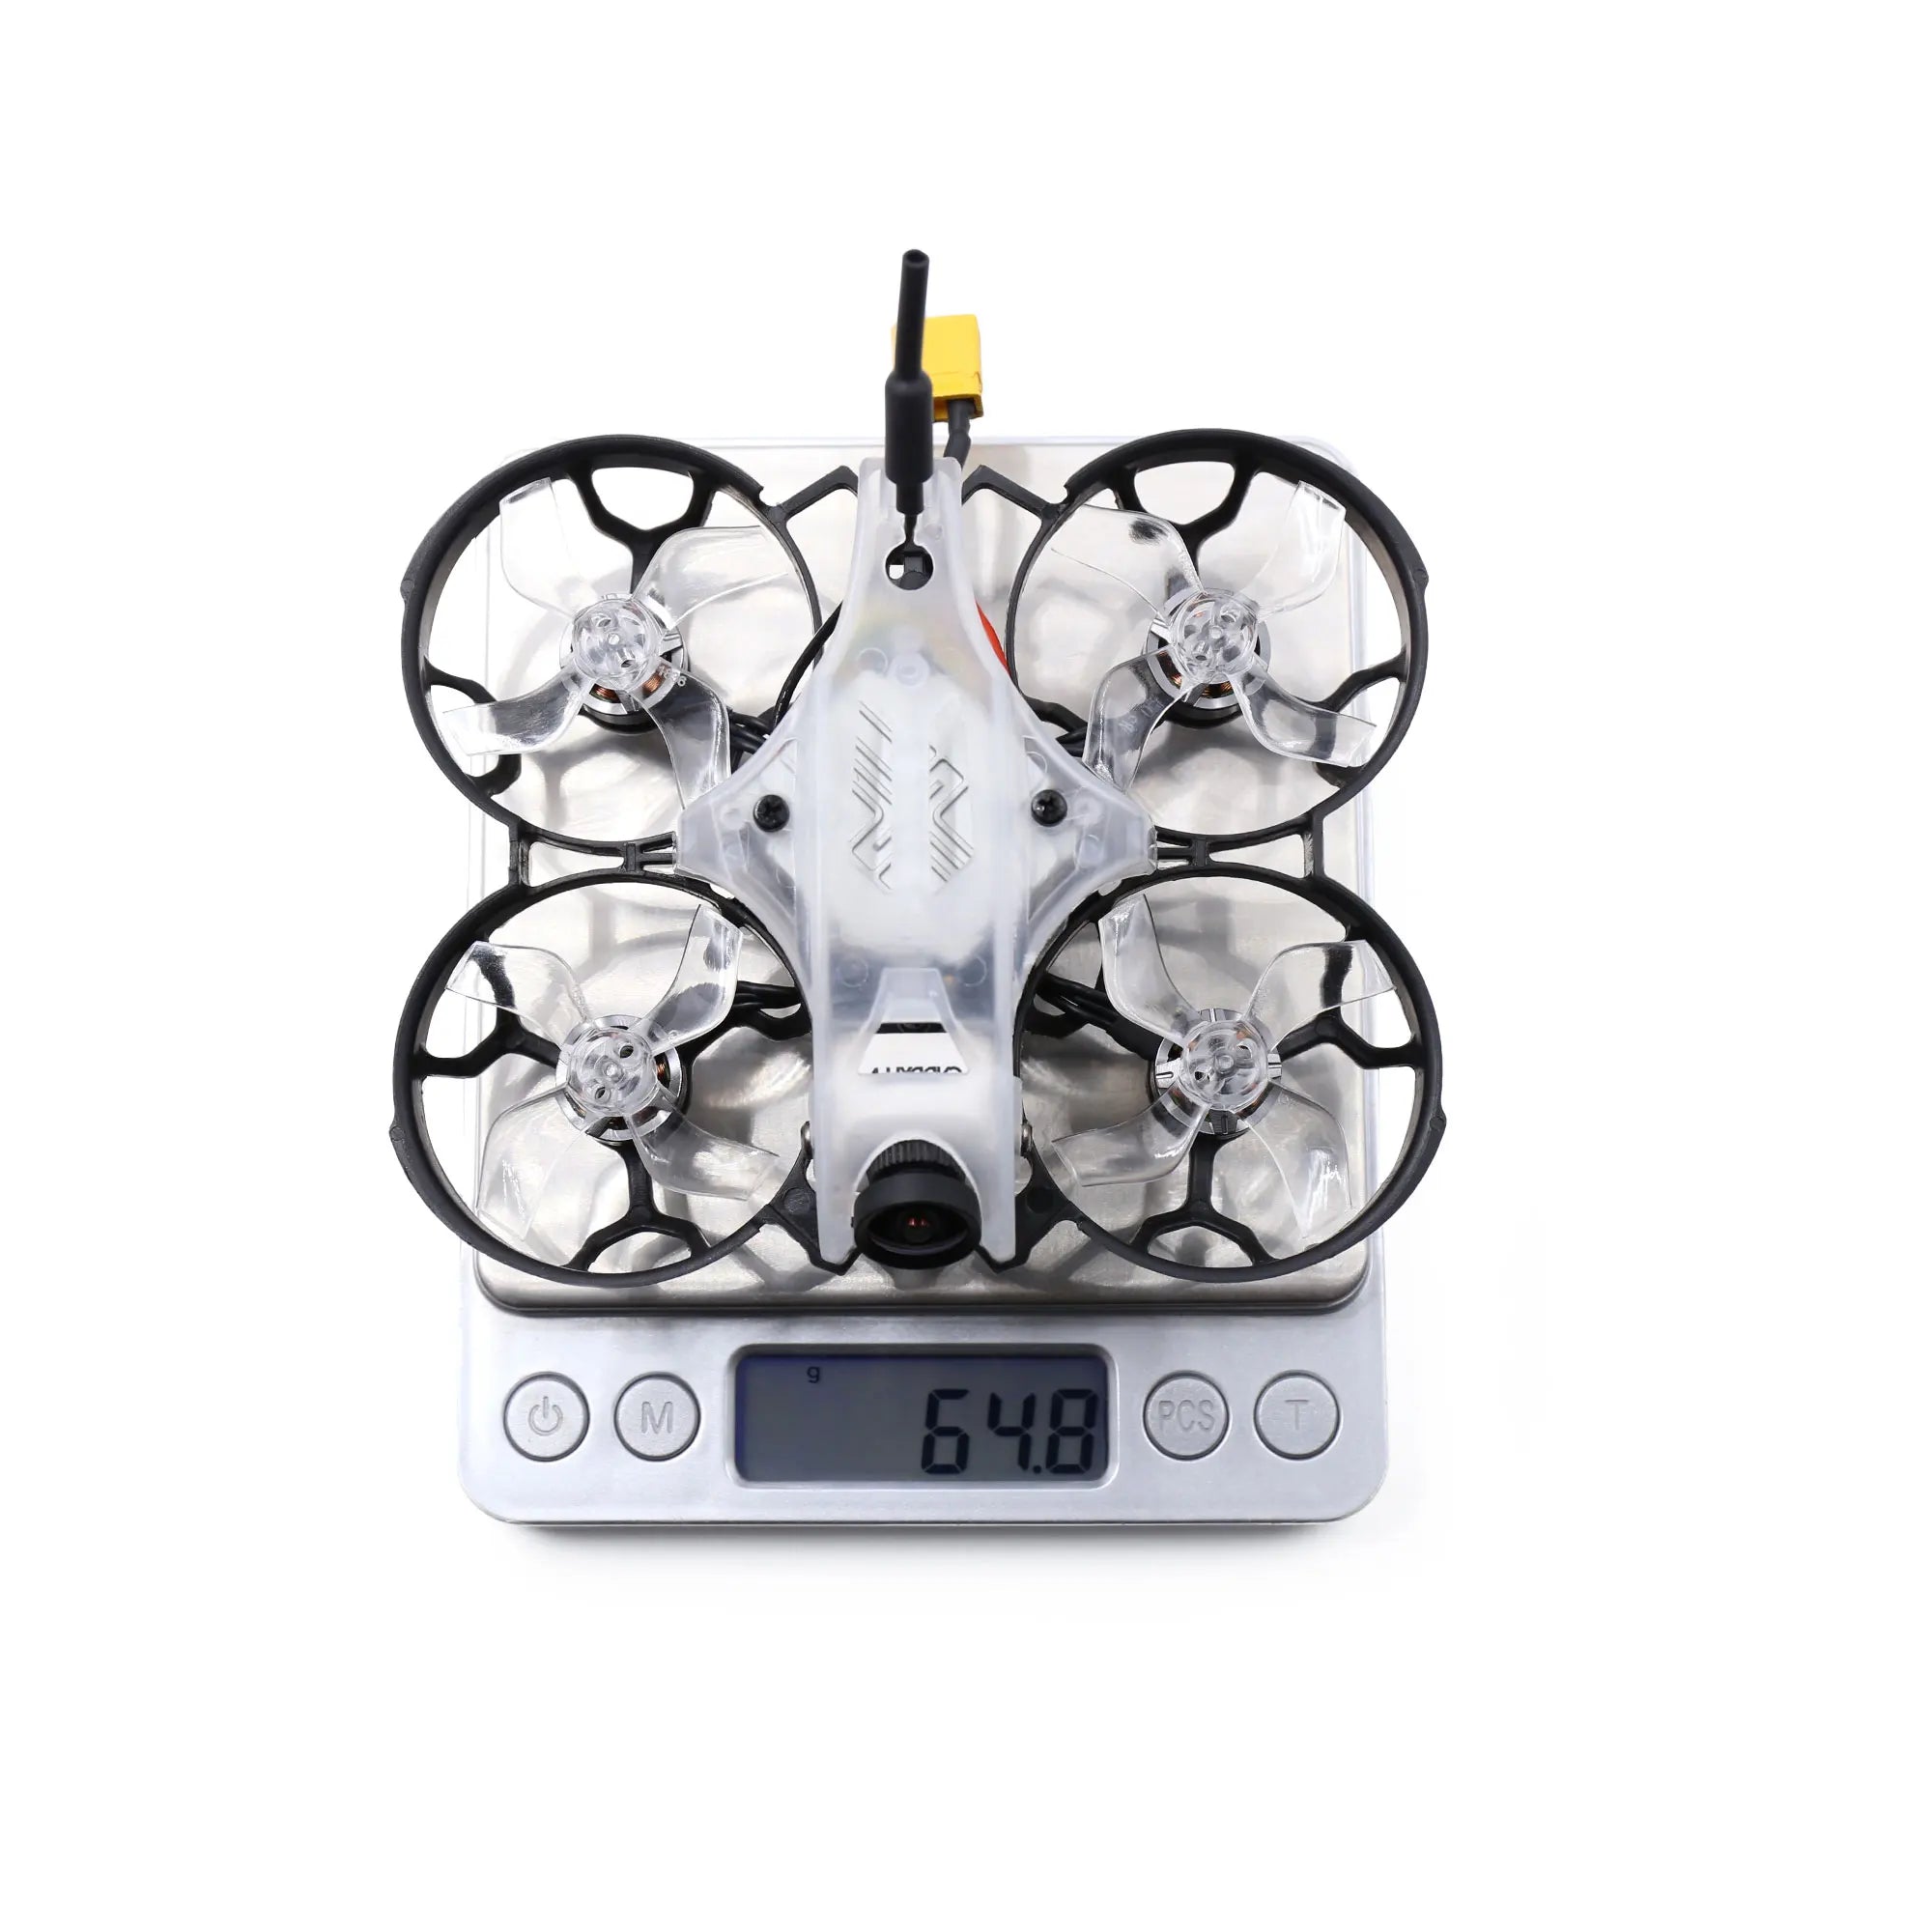 GEPRC Thinking P16 FPV Drone, weighs only 64g w/o battery and receiver.